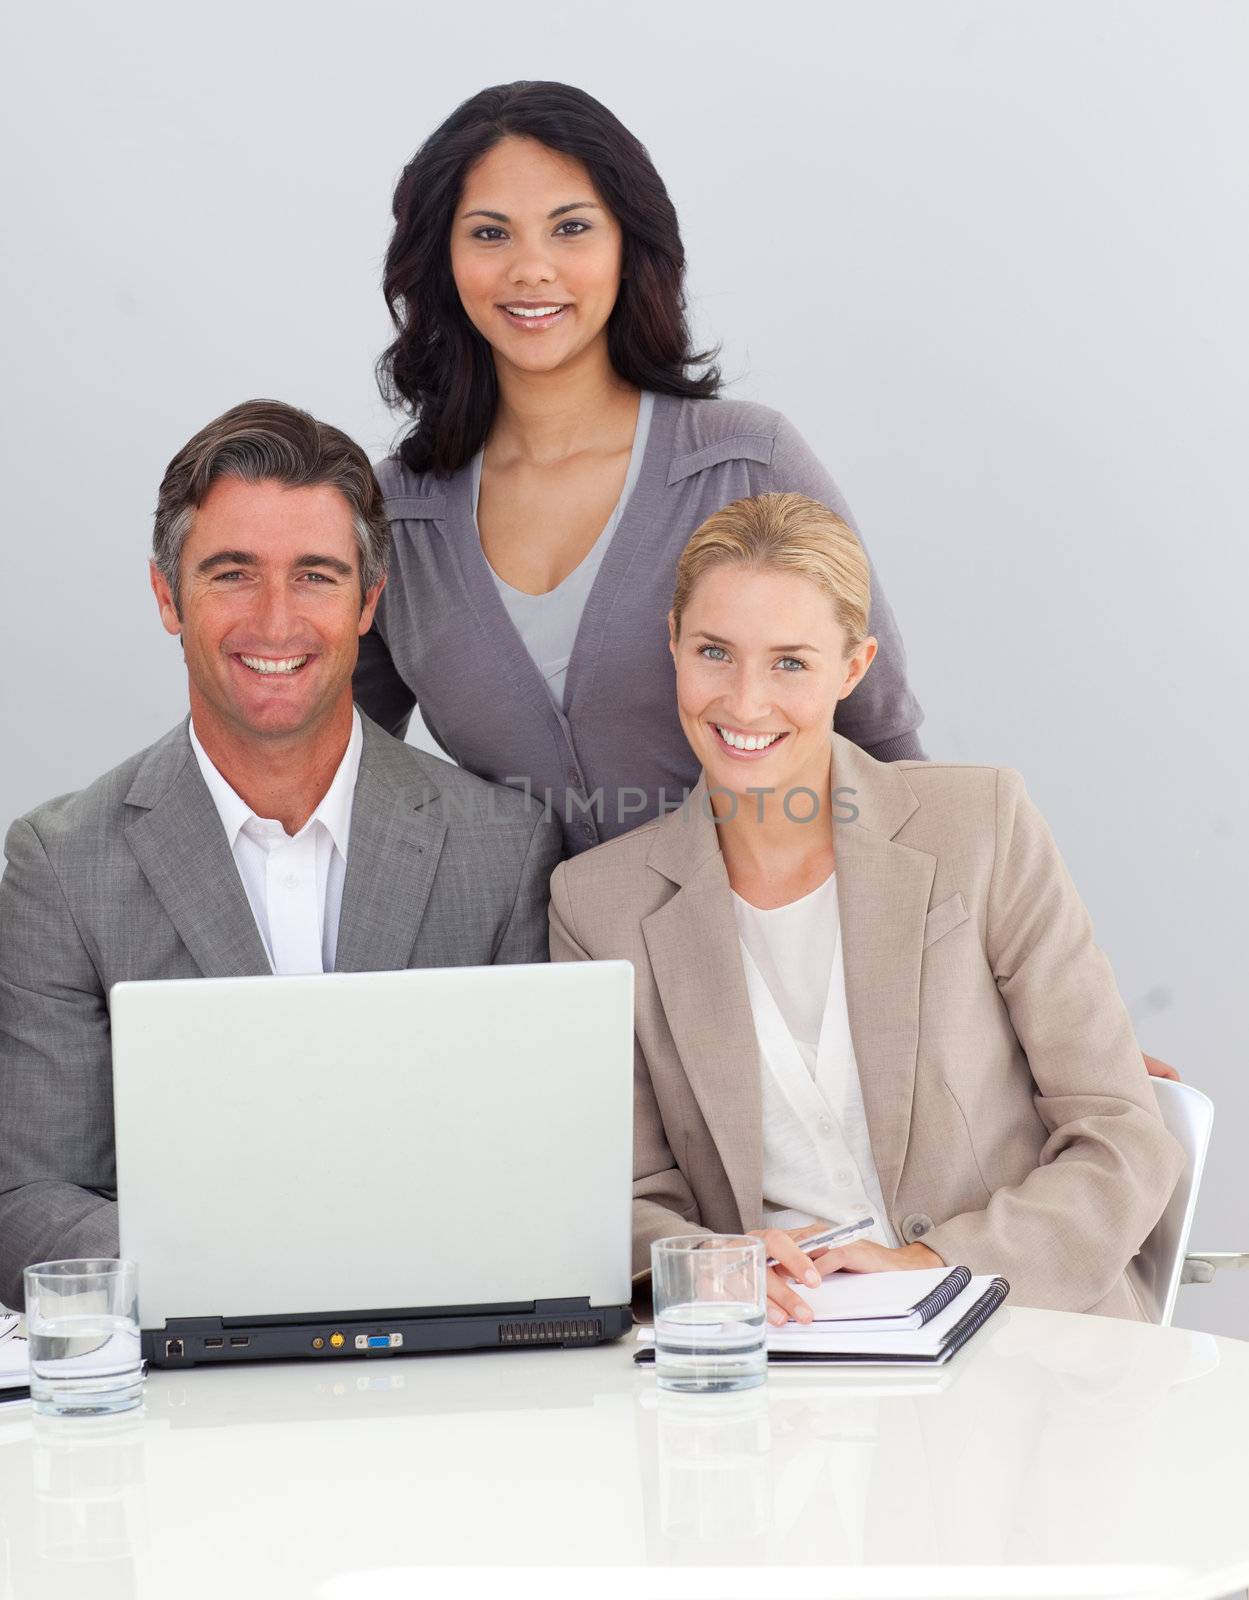 Smiling business team working with a laptop in the office